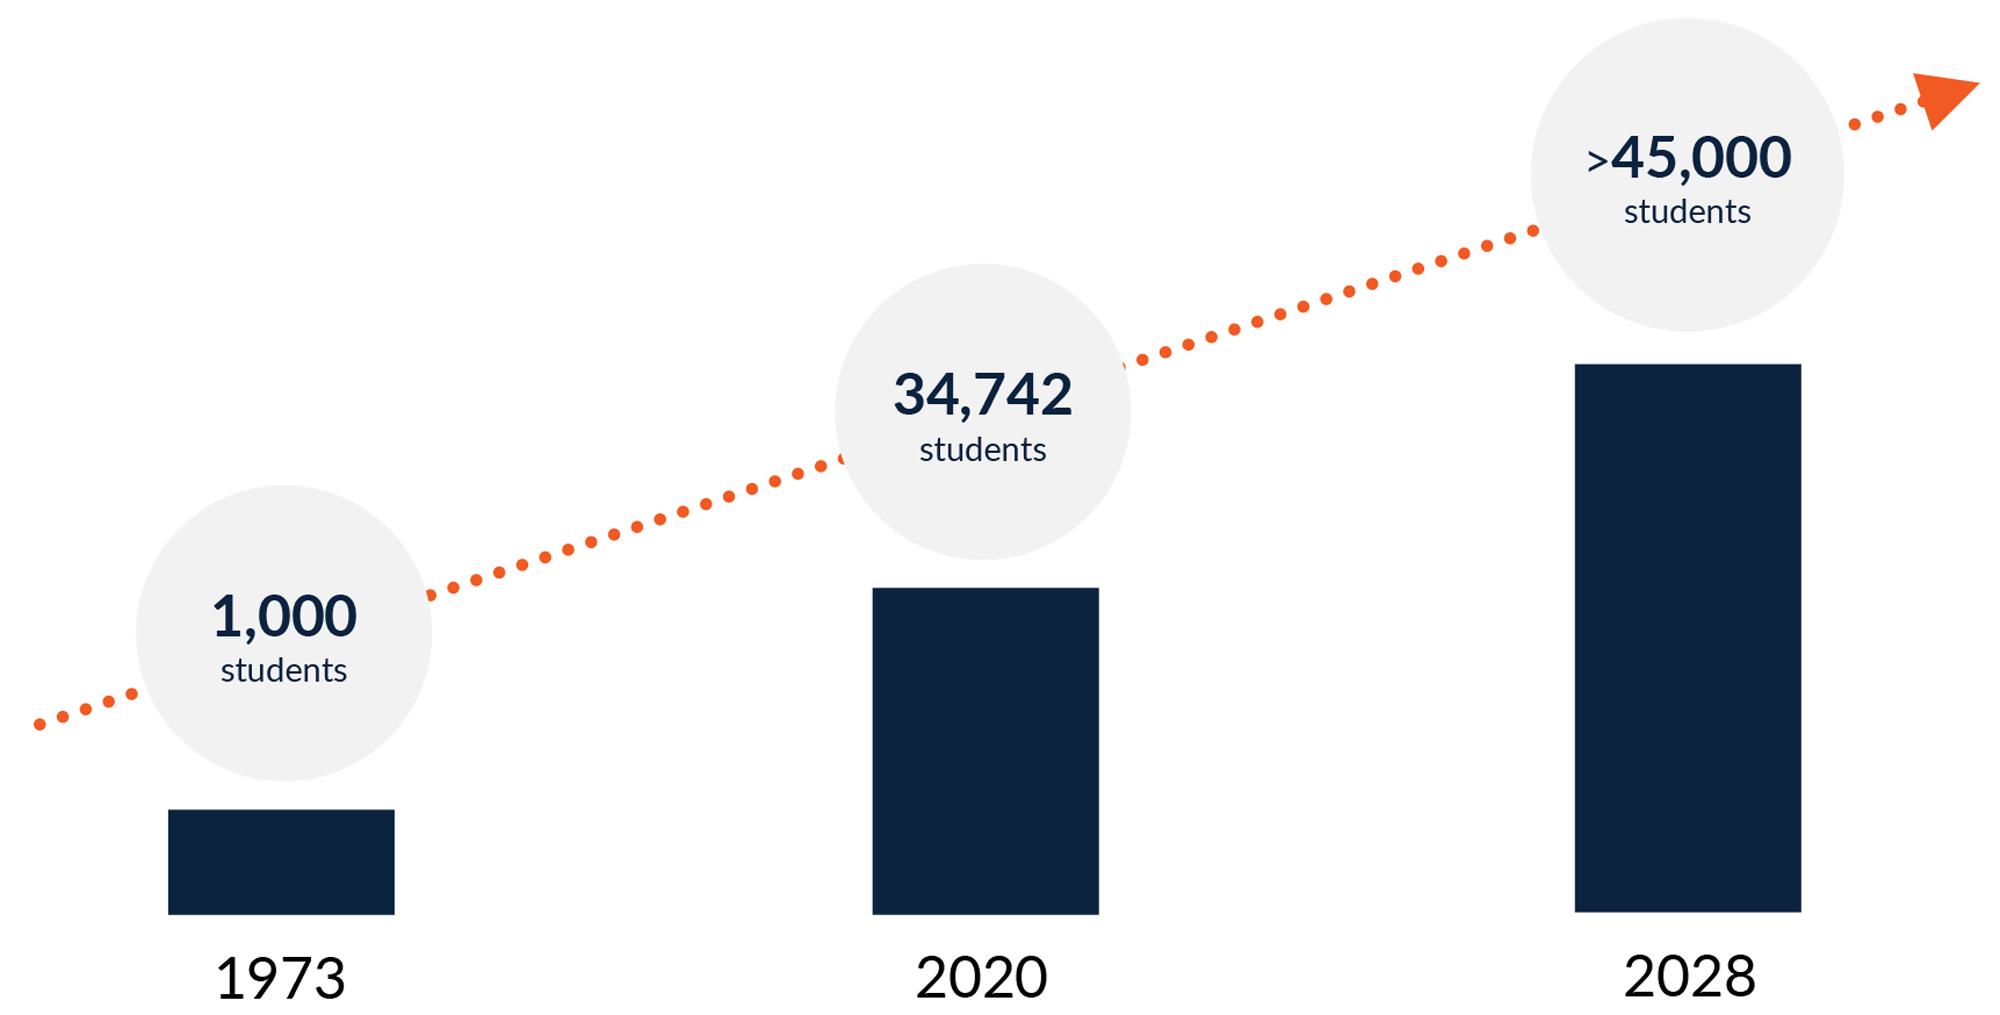 1000 students 1973, 34742 students 2020, 45000 students 2028